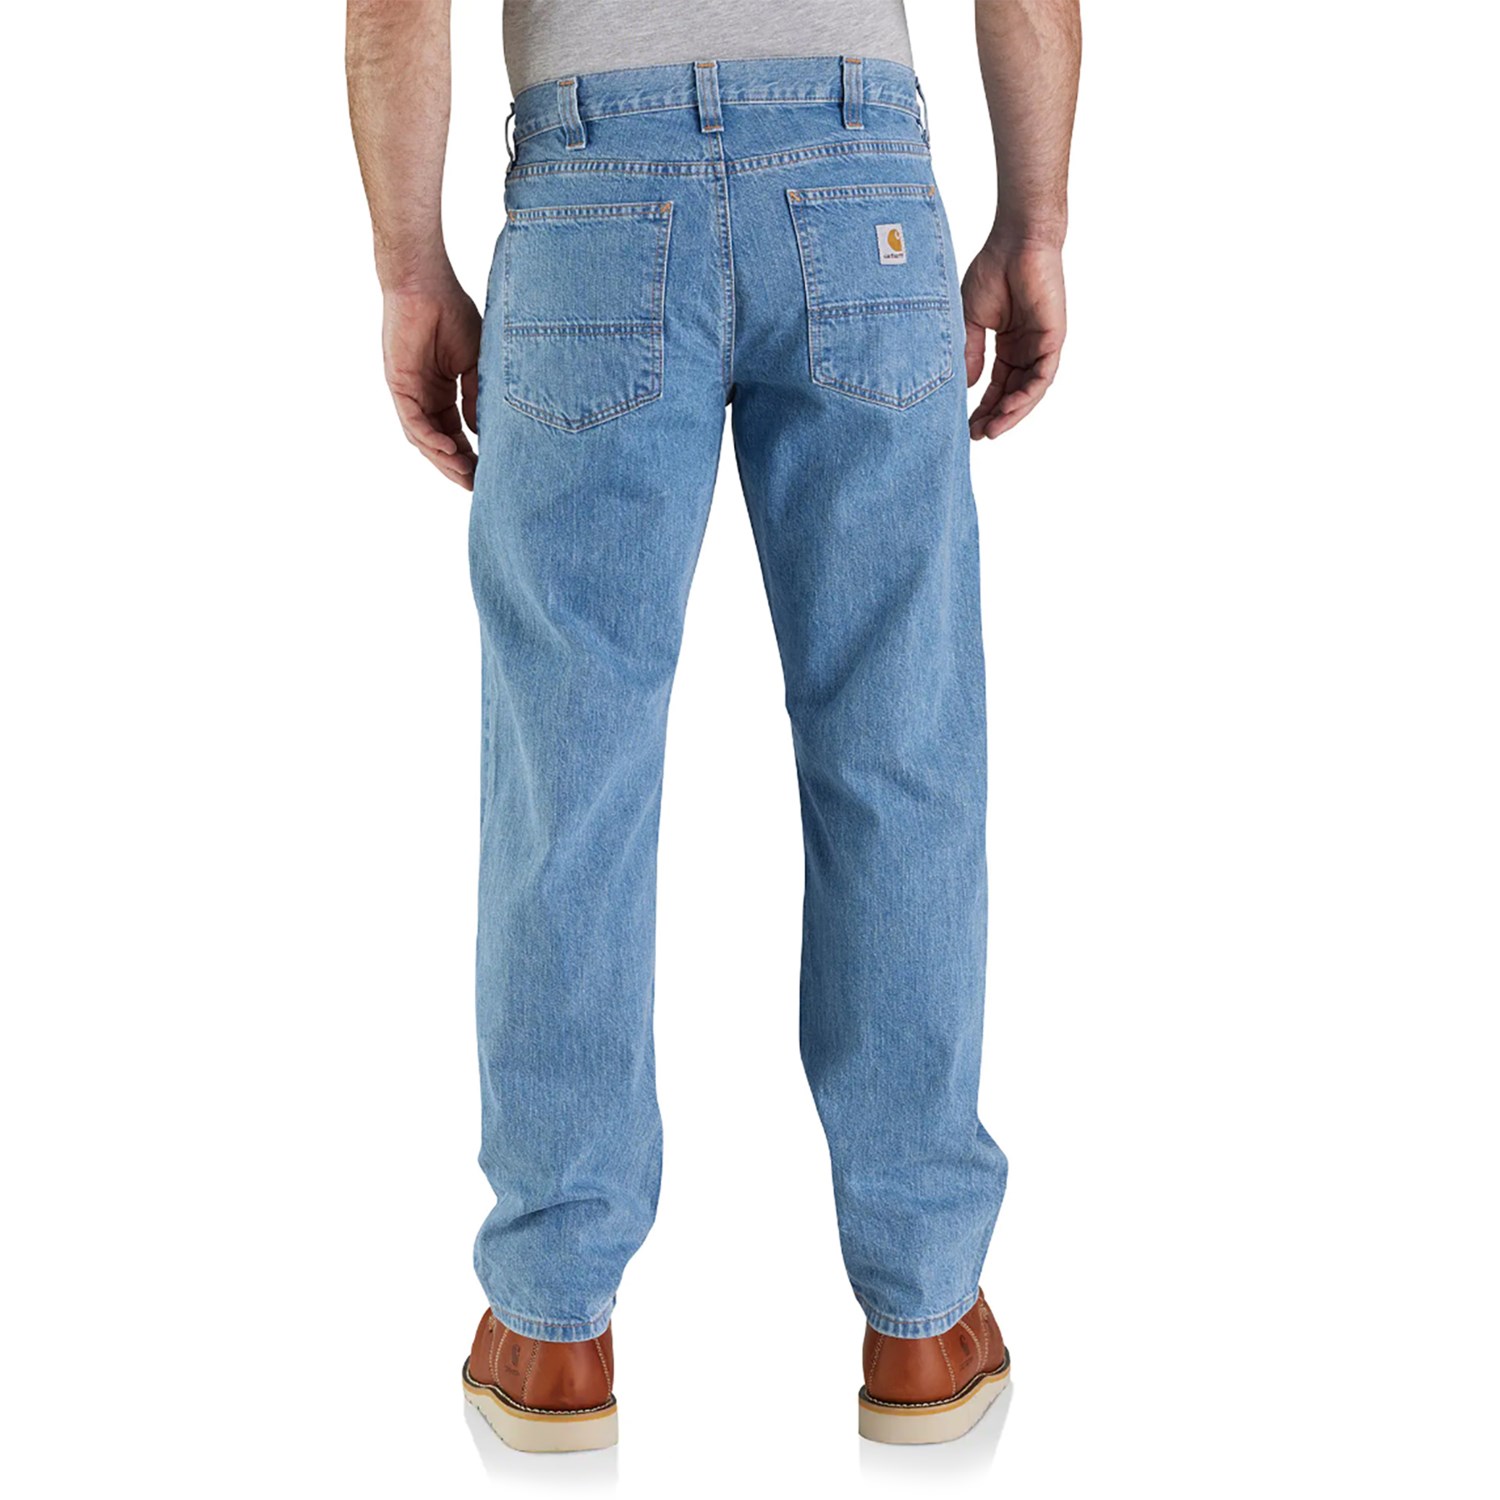 Carhartt 105119 Relaxed Fit 5-Pocket Jeans - Factory Seconds